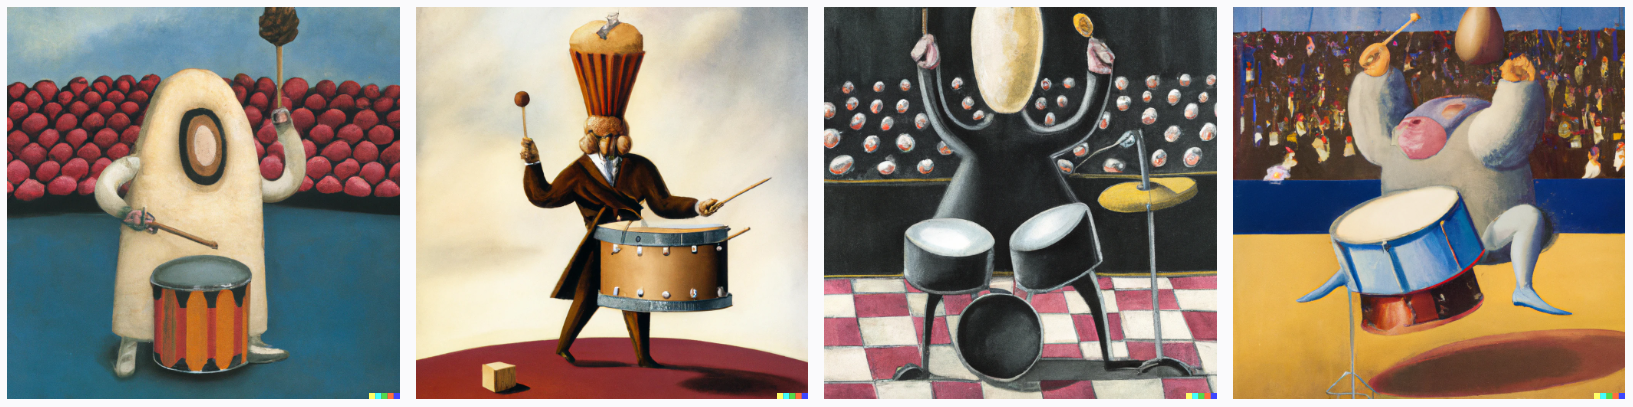 man performing a drum solo in a stadium wearing a muffin costume surrealism painting 1979